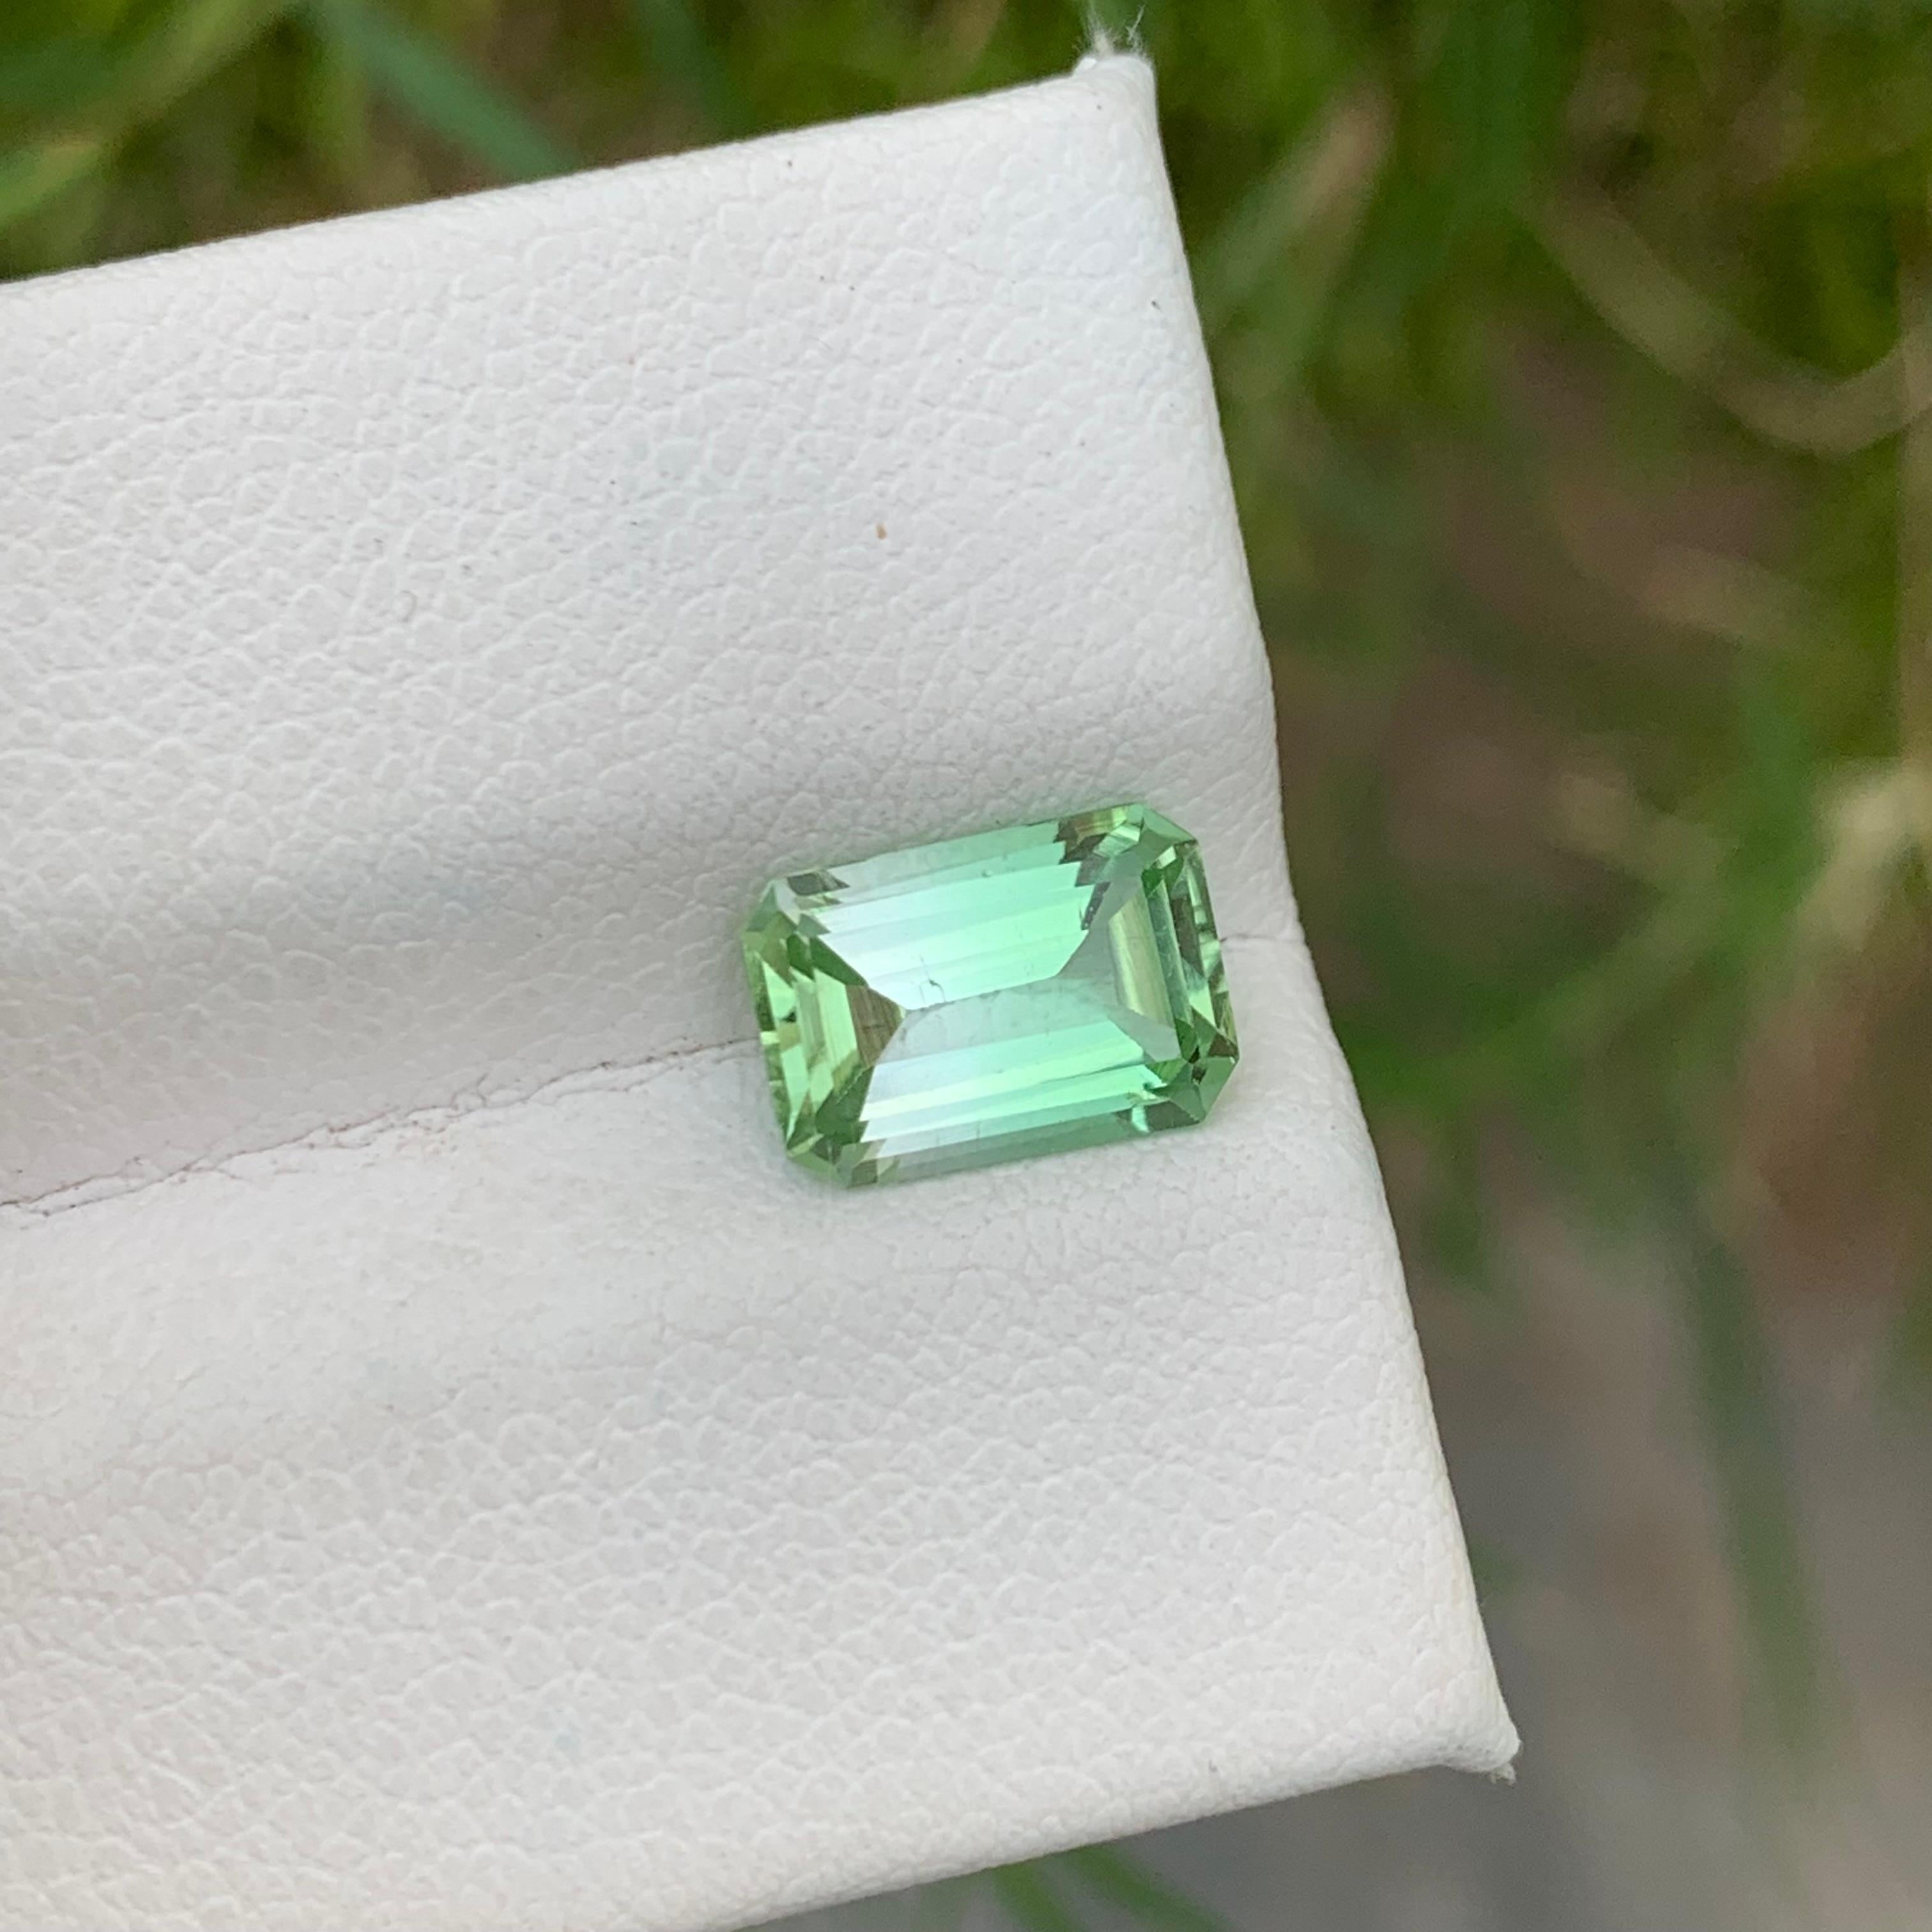 Gorgeous Natural Loose Mint Green Tourmaline Emerald Cut Ring Gemstone 2.0 Carat For Sale 6